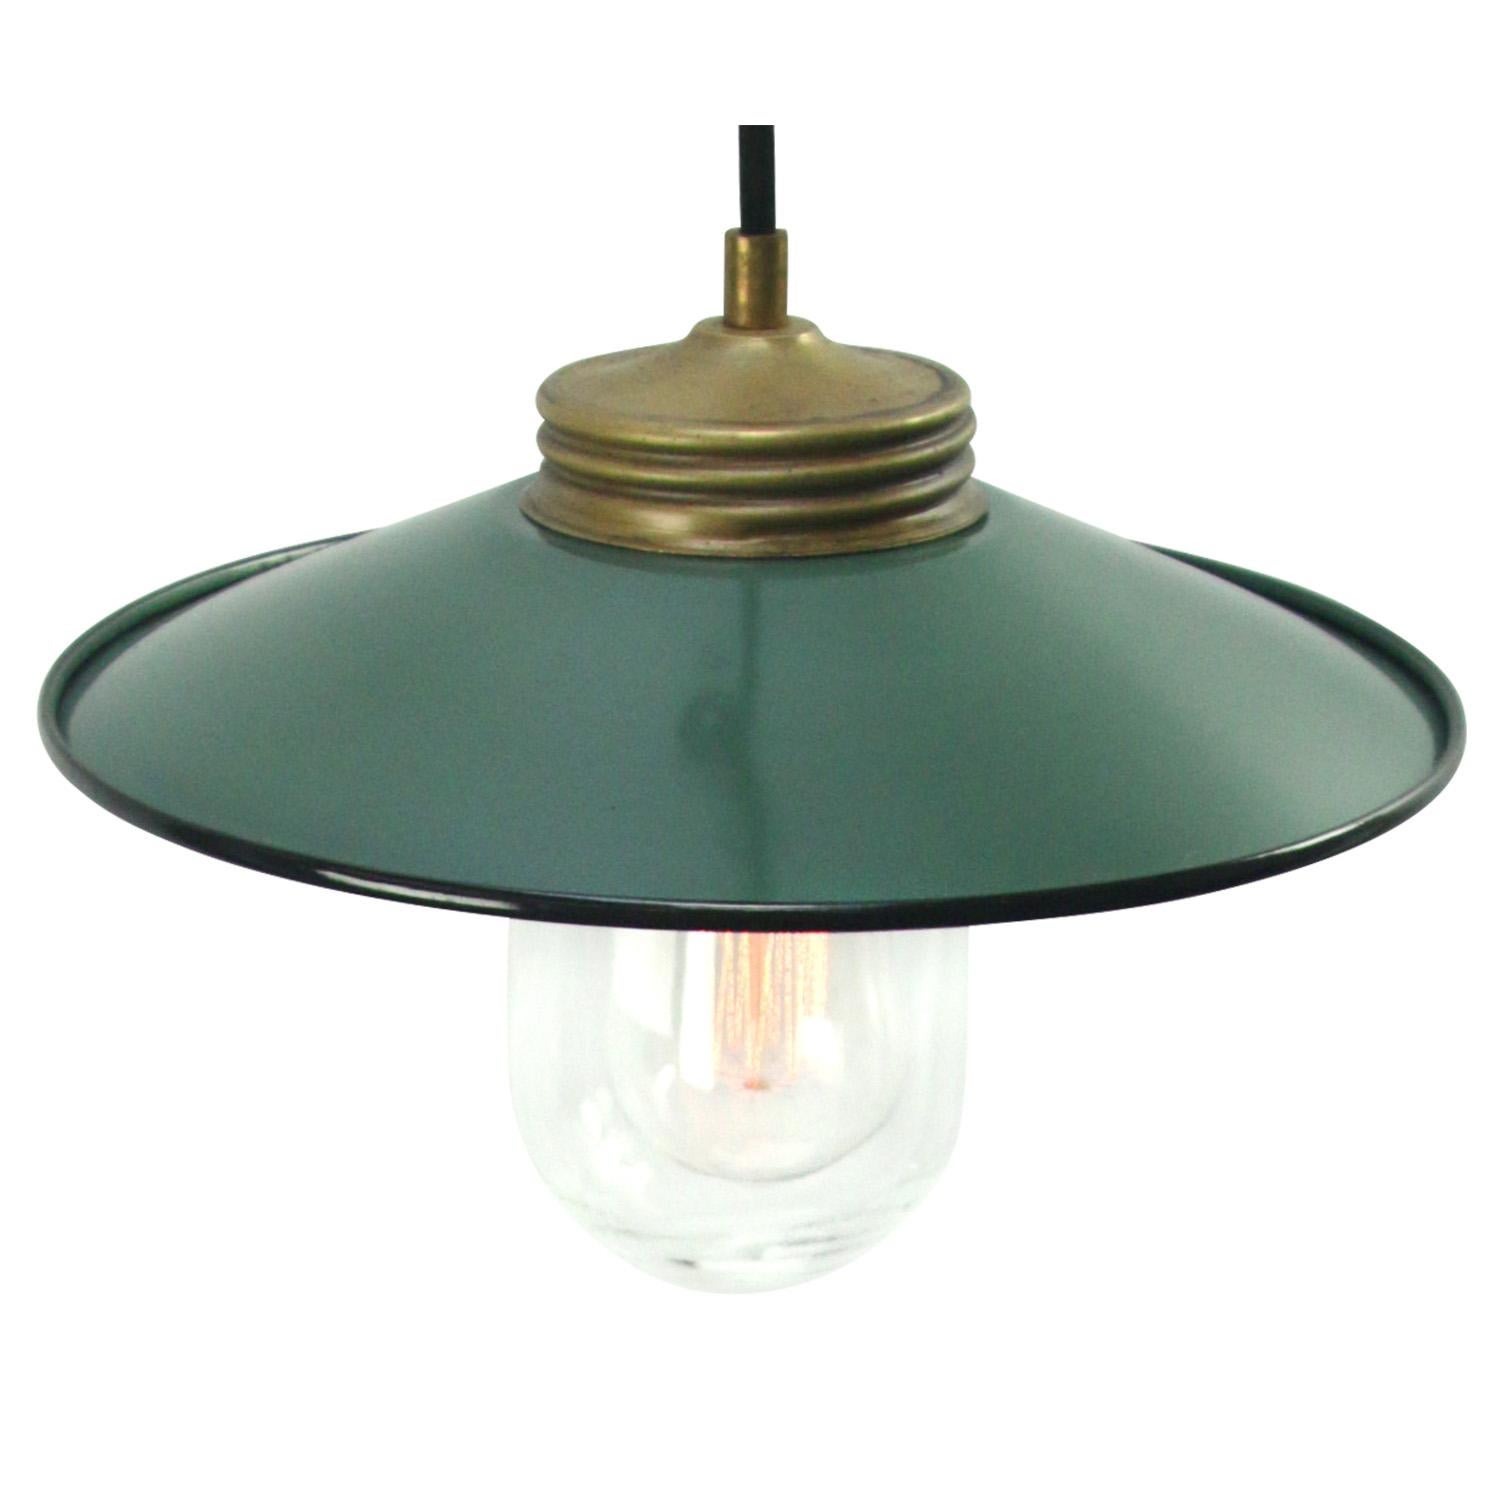 Petrol enamel Industrial hanging lamp.
Clear glass with brass top.

Weight: 1.10 kg / 2.4 lb

Priced per individual item. All lamps have been made suitable by international standards for incandescent light bulbs, energy-efficient and LED bulbs.